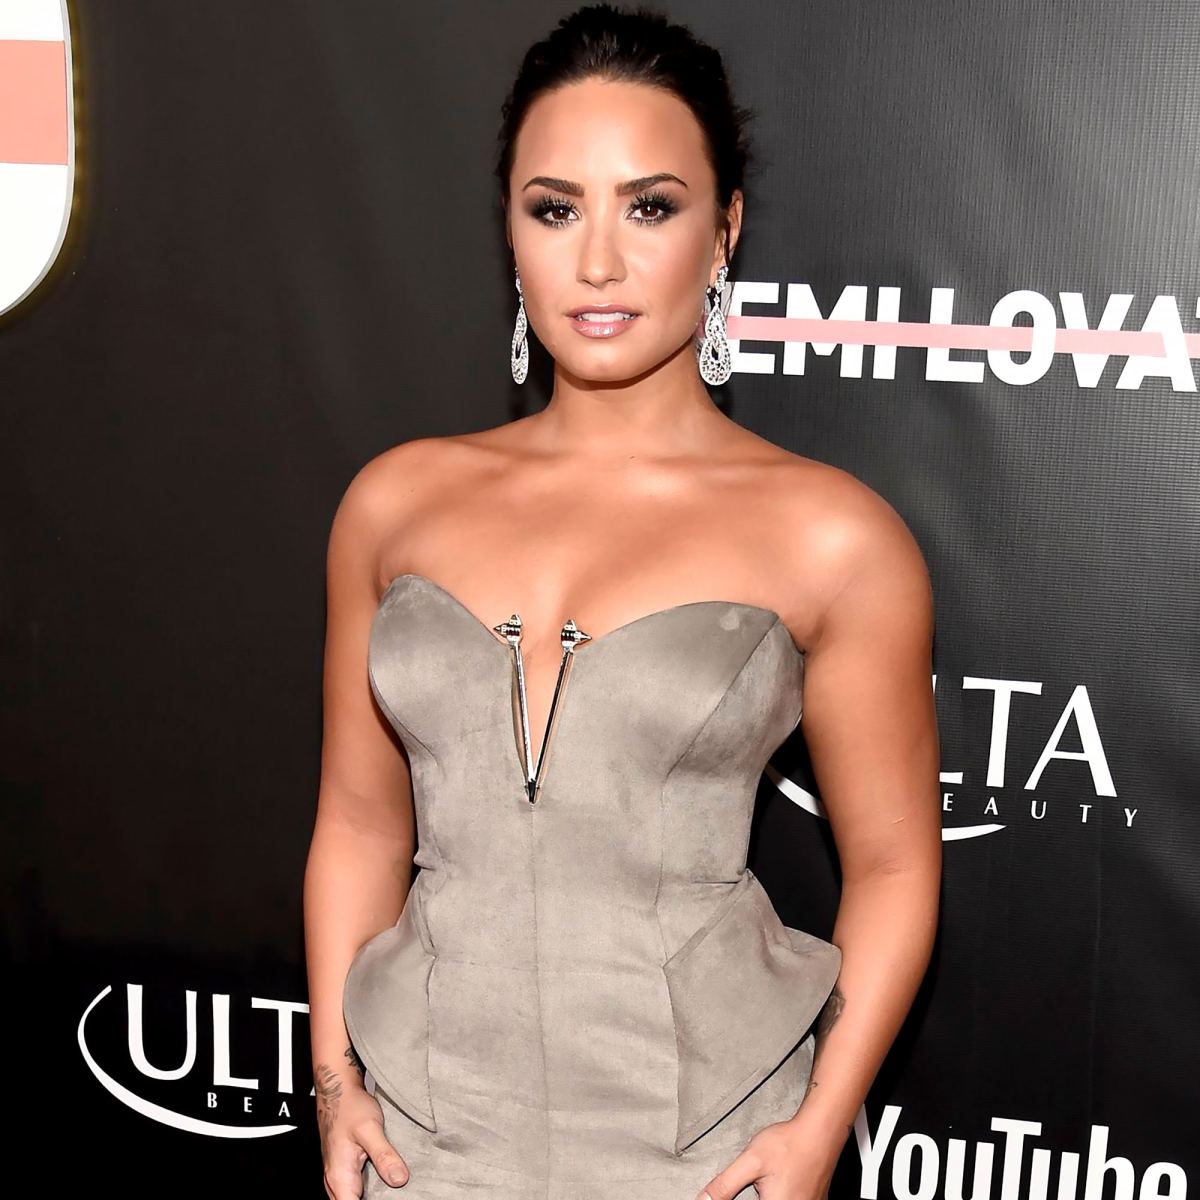 Demi Lovato's Coming Out Journey: Everything They've Said